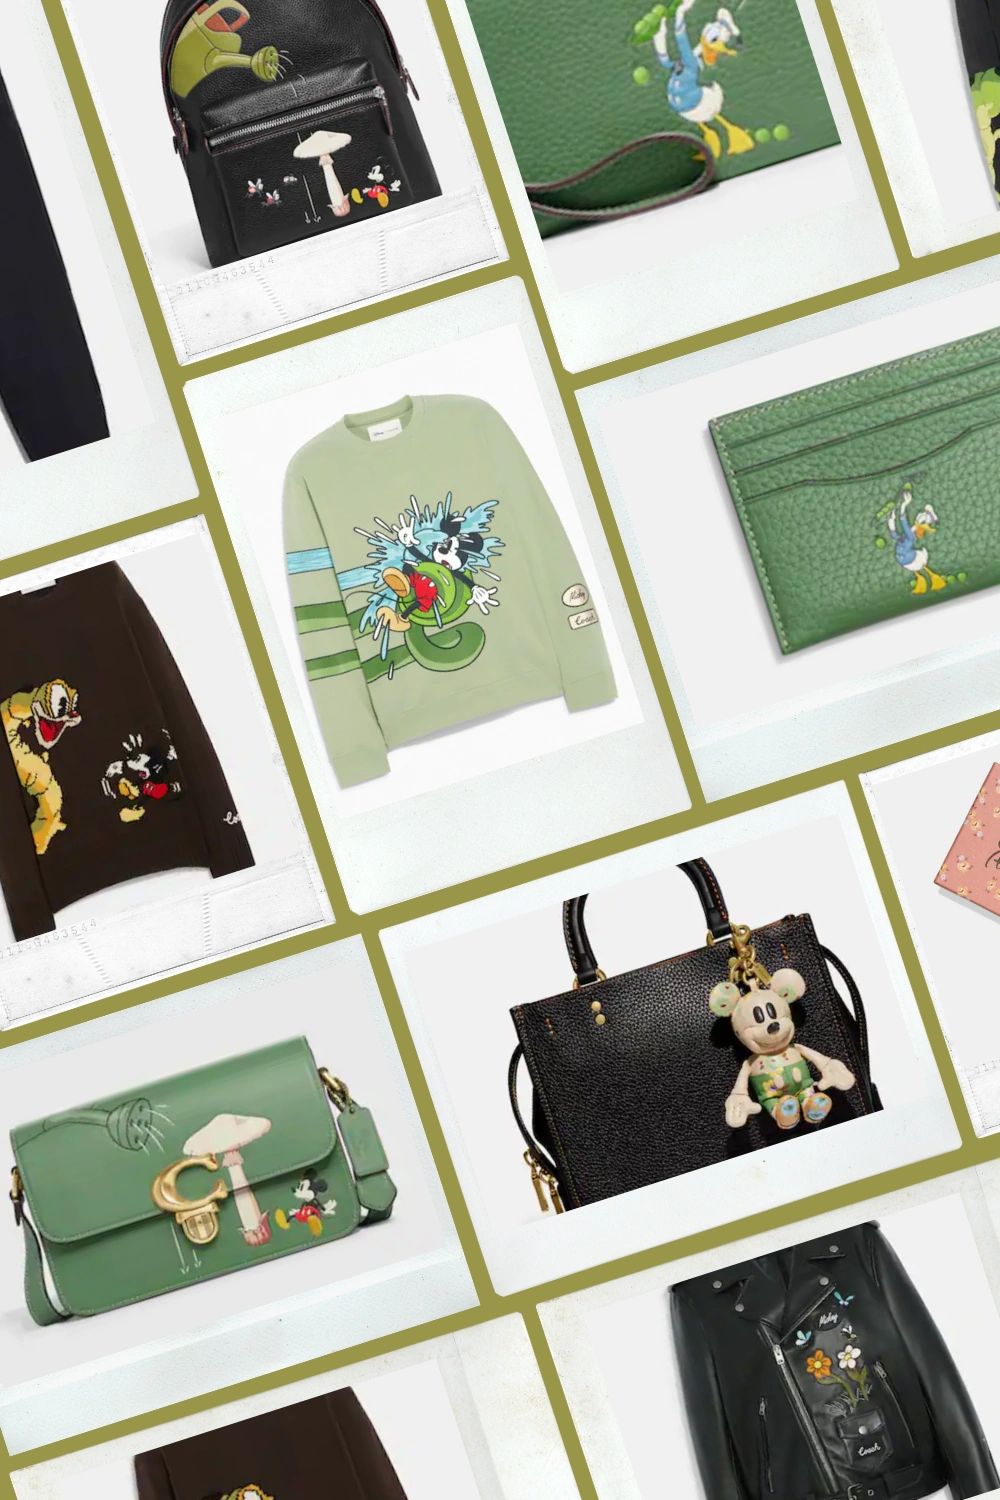 Coach Celebrates 100 Years of Disney With New Collection of